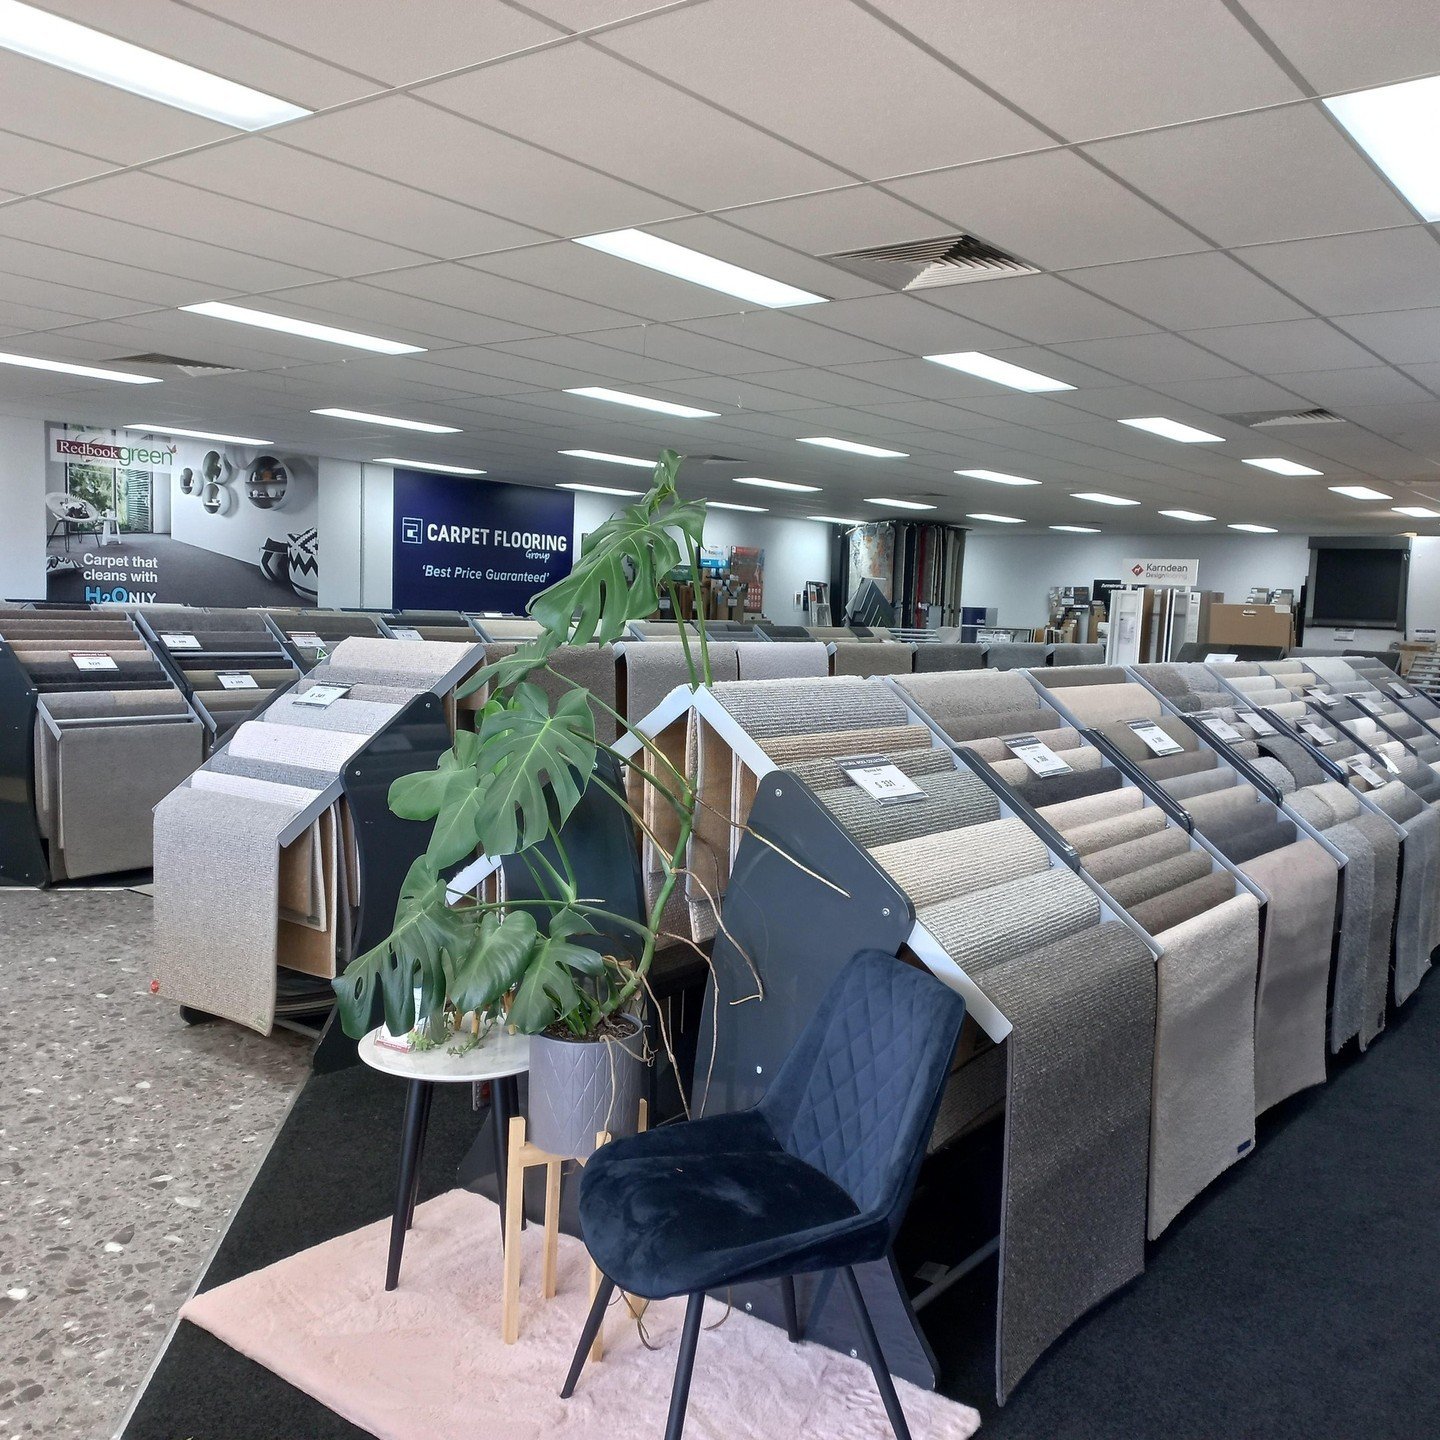 Why settle for less when you can have the best? Carpet Flooring Group guarantees the best prices and the highest quality flooring. Experience excellence in every step of your journey. 💯⁠
⁠
👉🏻www.carpetflooringgroup.com.au